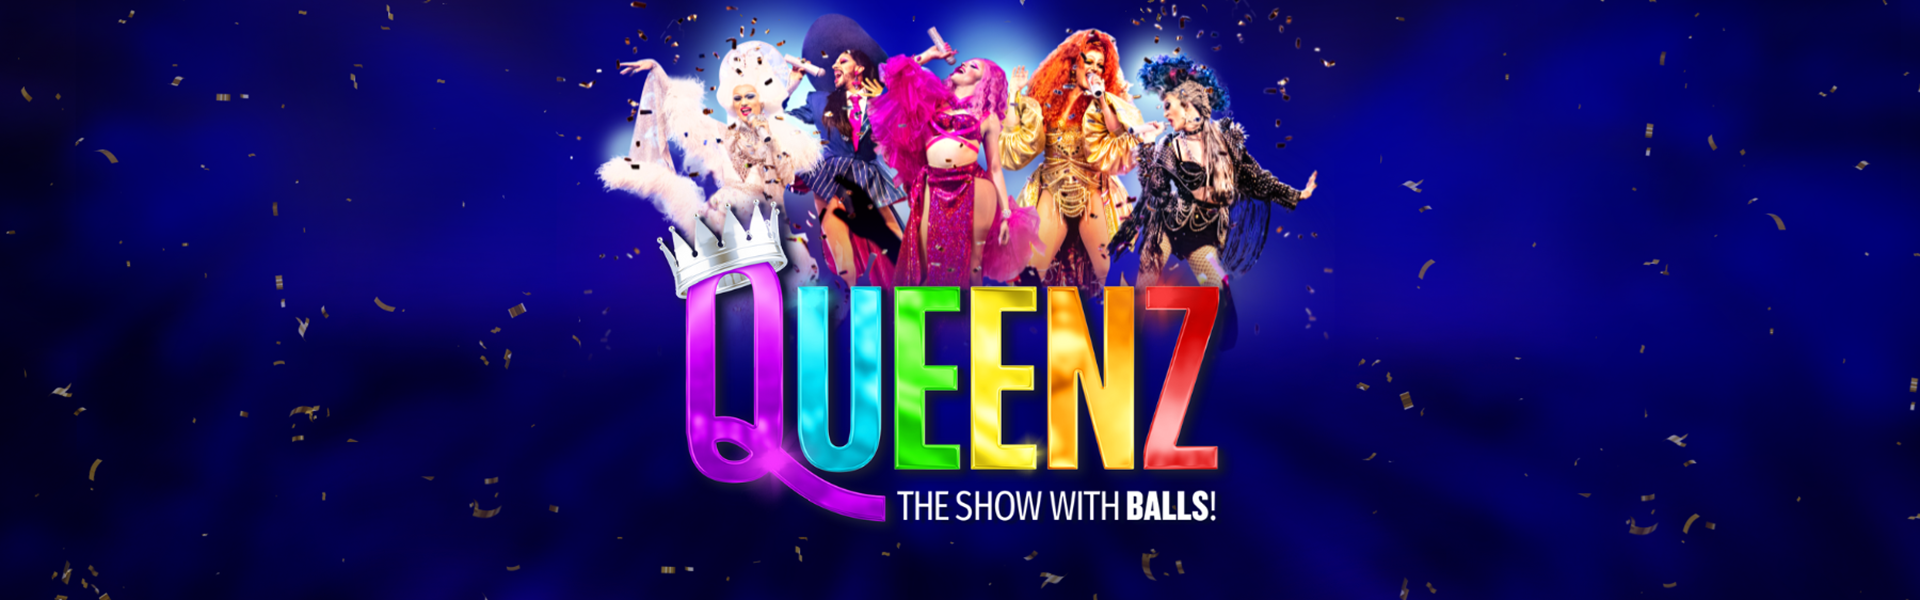 Queenz: The Show with Balls!